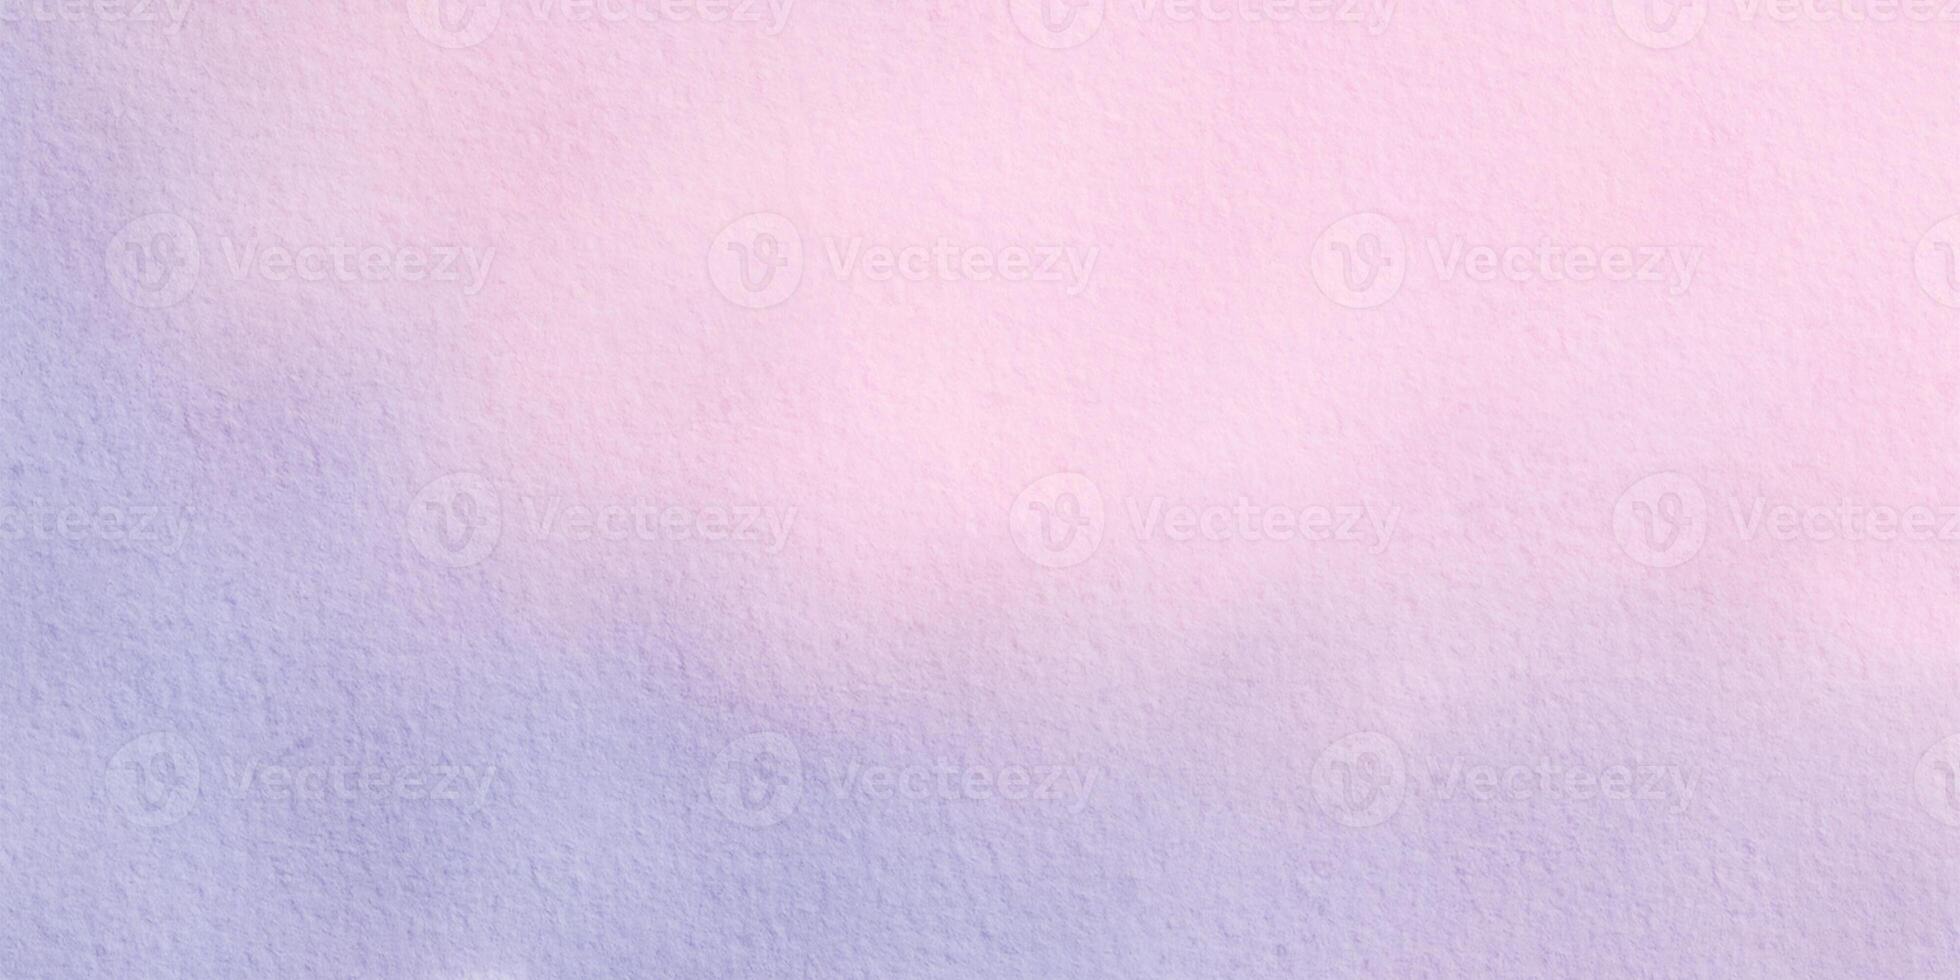 Watercolor background with Pink and purple pastel color on canvas paper.  Texture in abstract illustration. 8197680 Stock Photo at Vecteezy